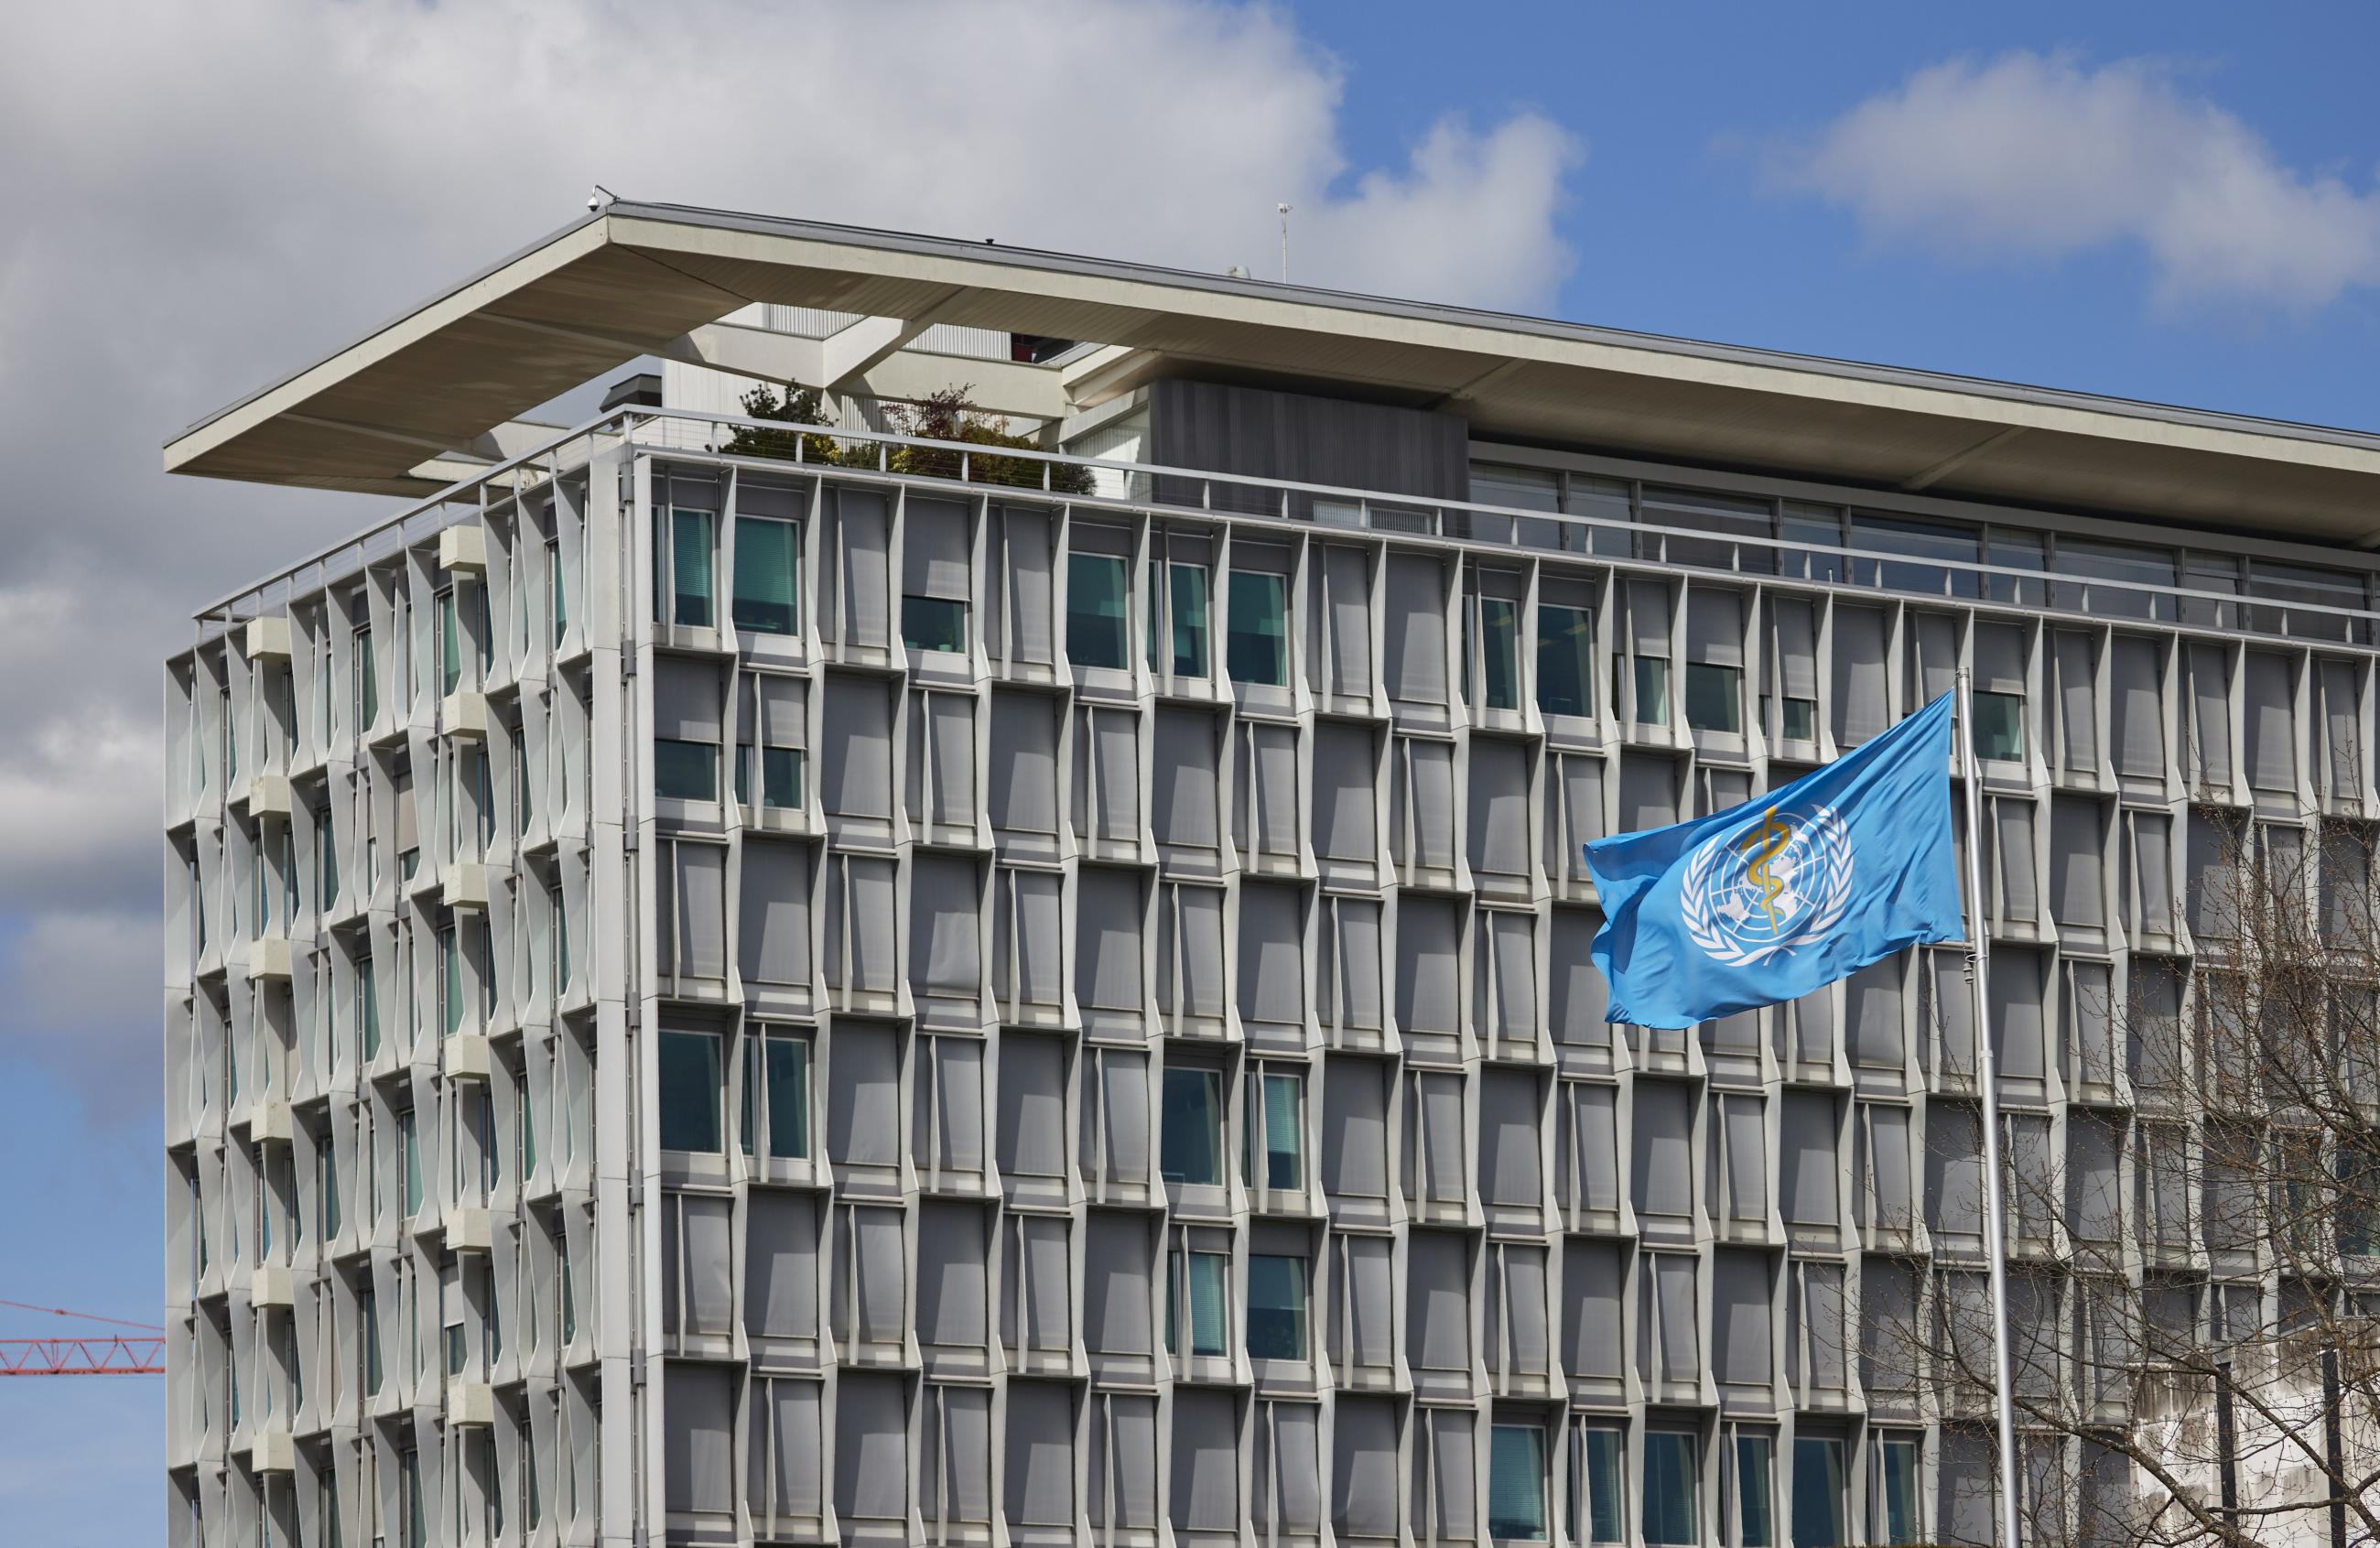 A flag is pictured outside a building of the World Health Organization (WHO) during an executive board meeting on update on the coronavirus disease (COVID-19) outbreak, in Geneva, Switzerland